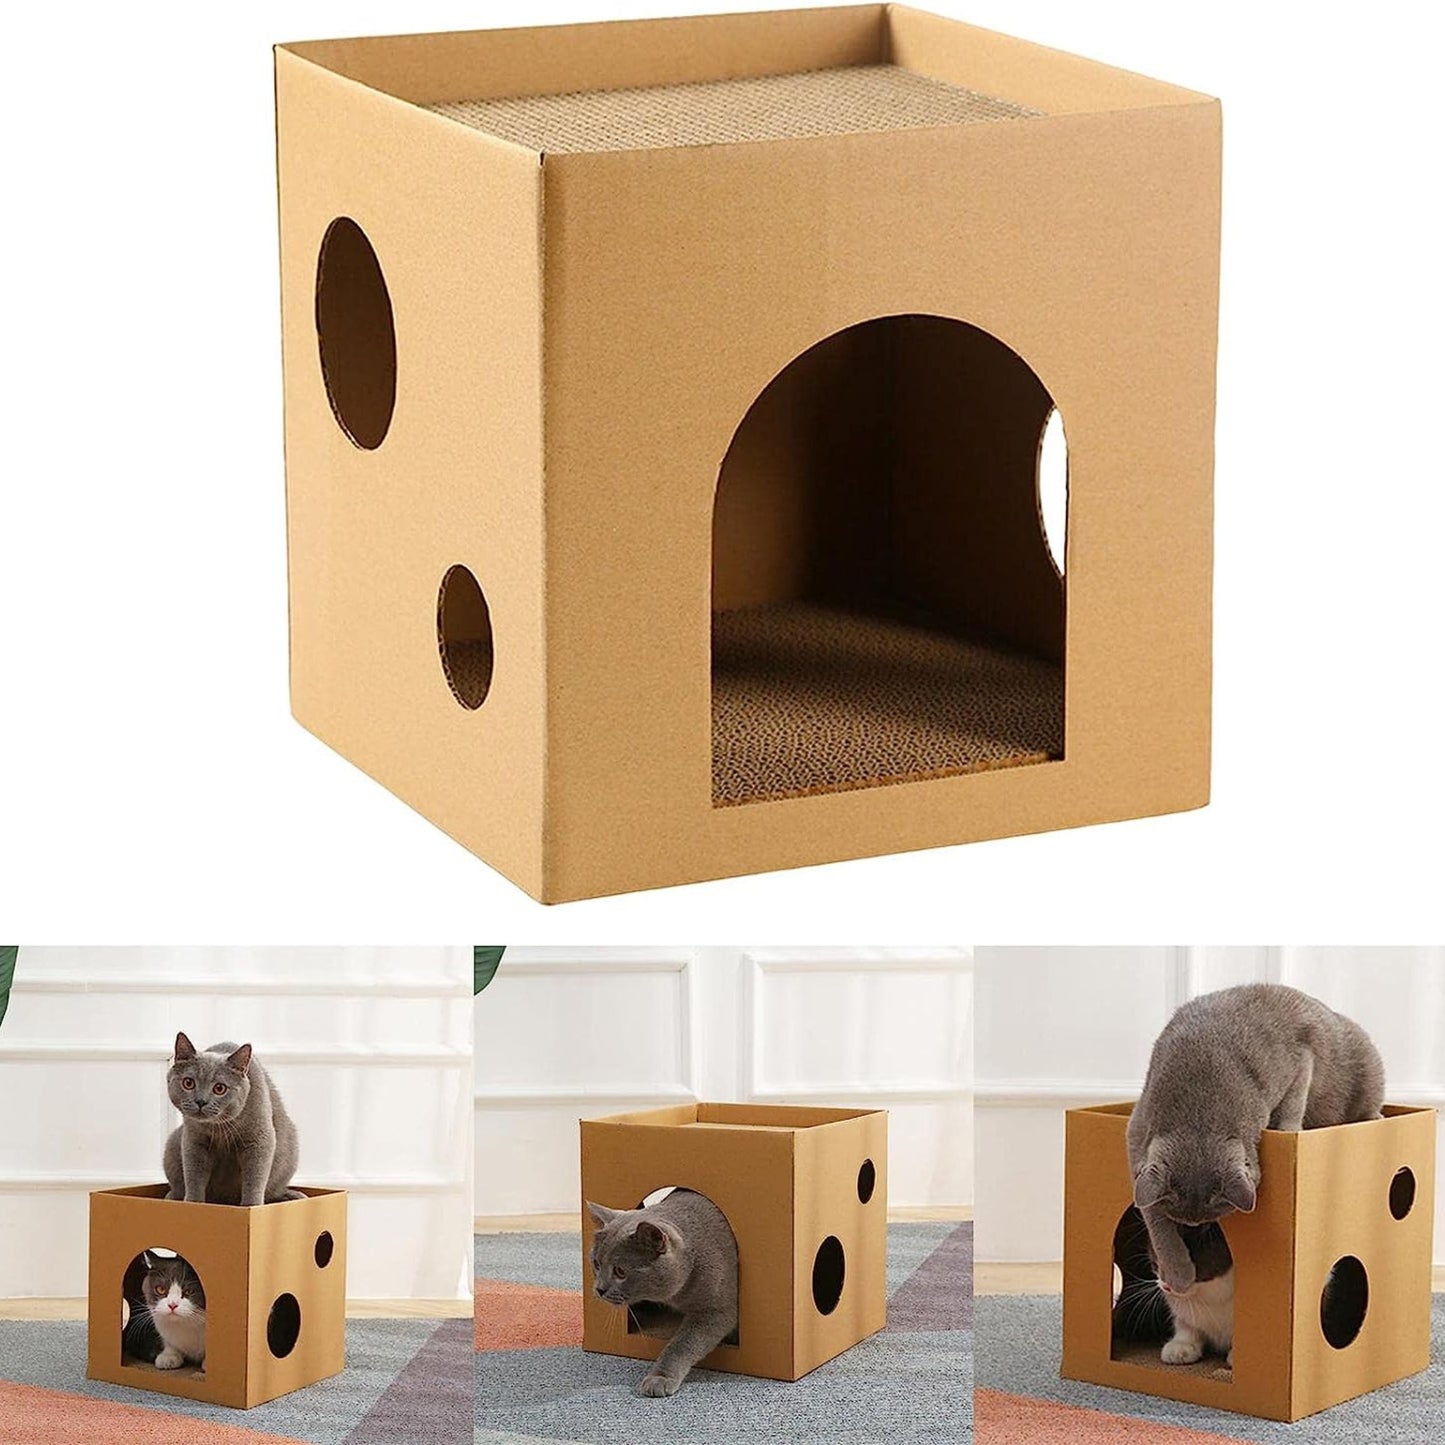 Foodie Puppies Corrugated Lodge Scratcher/Furniture for Cats & Kittens